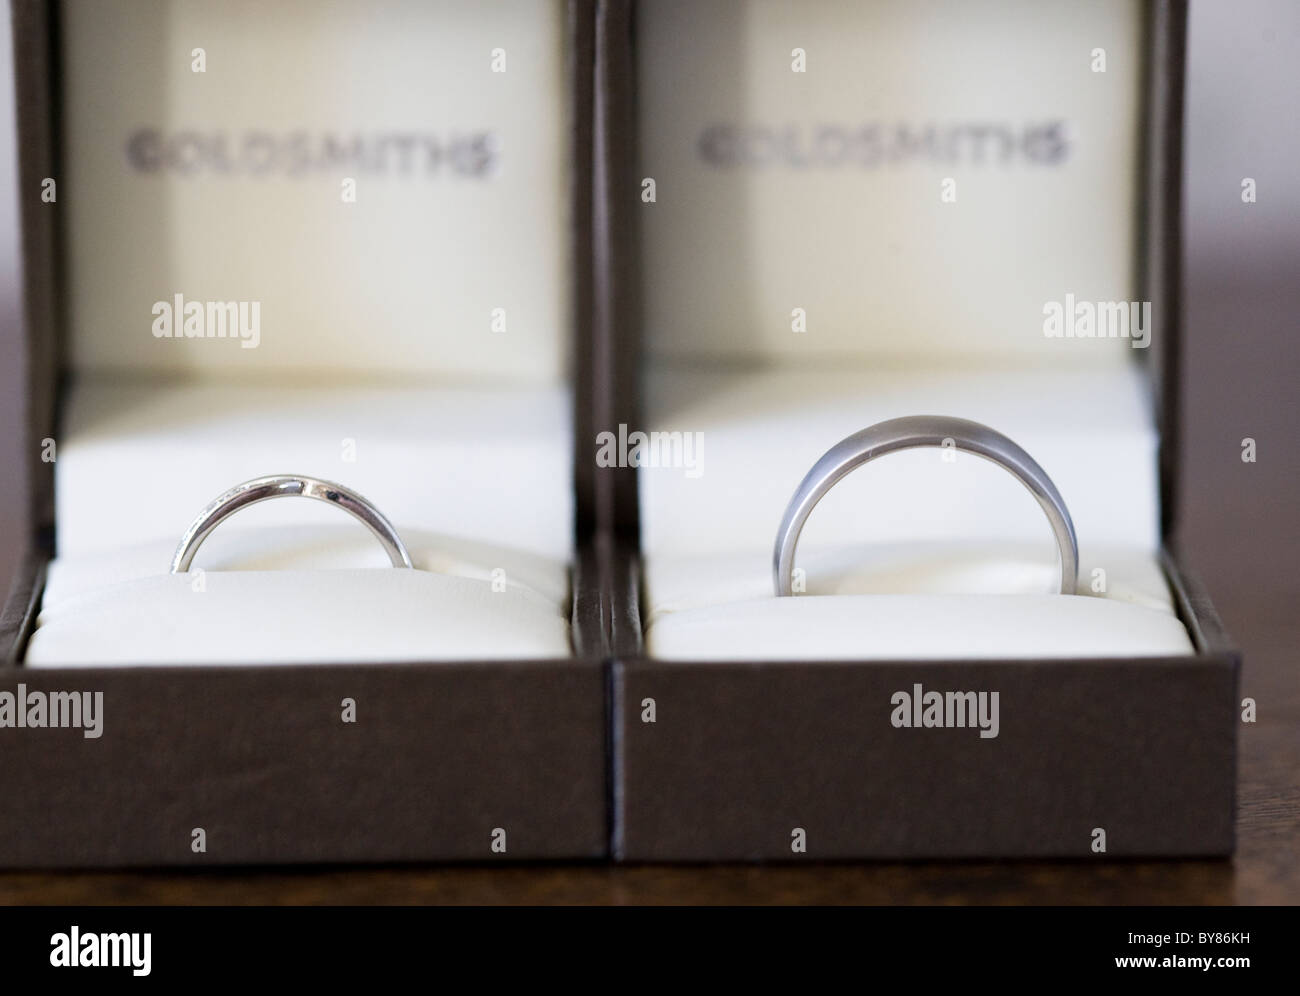 Wedding rings in presentation boxes Stock Photo